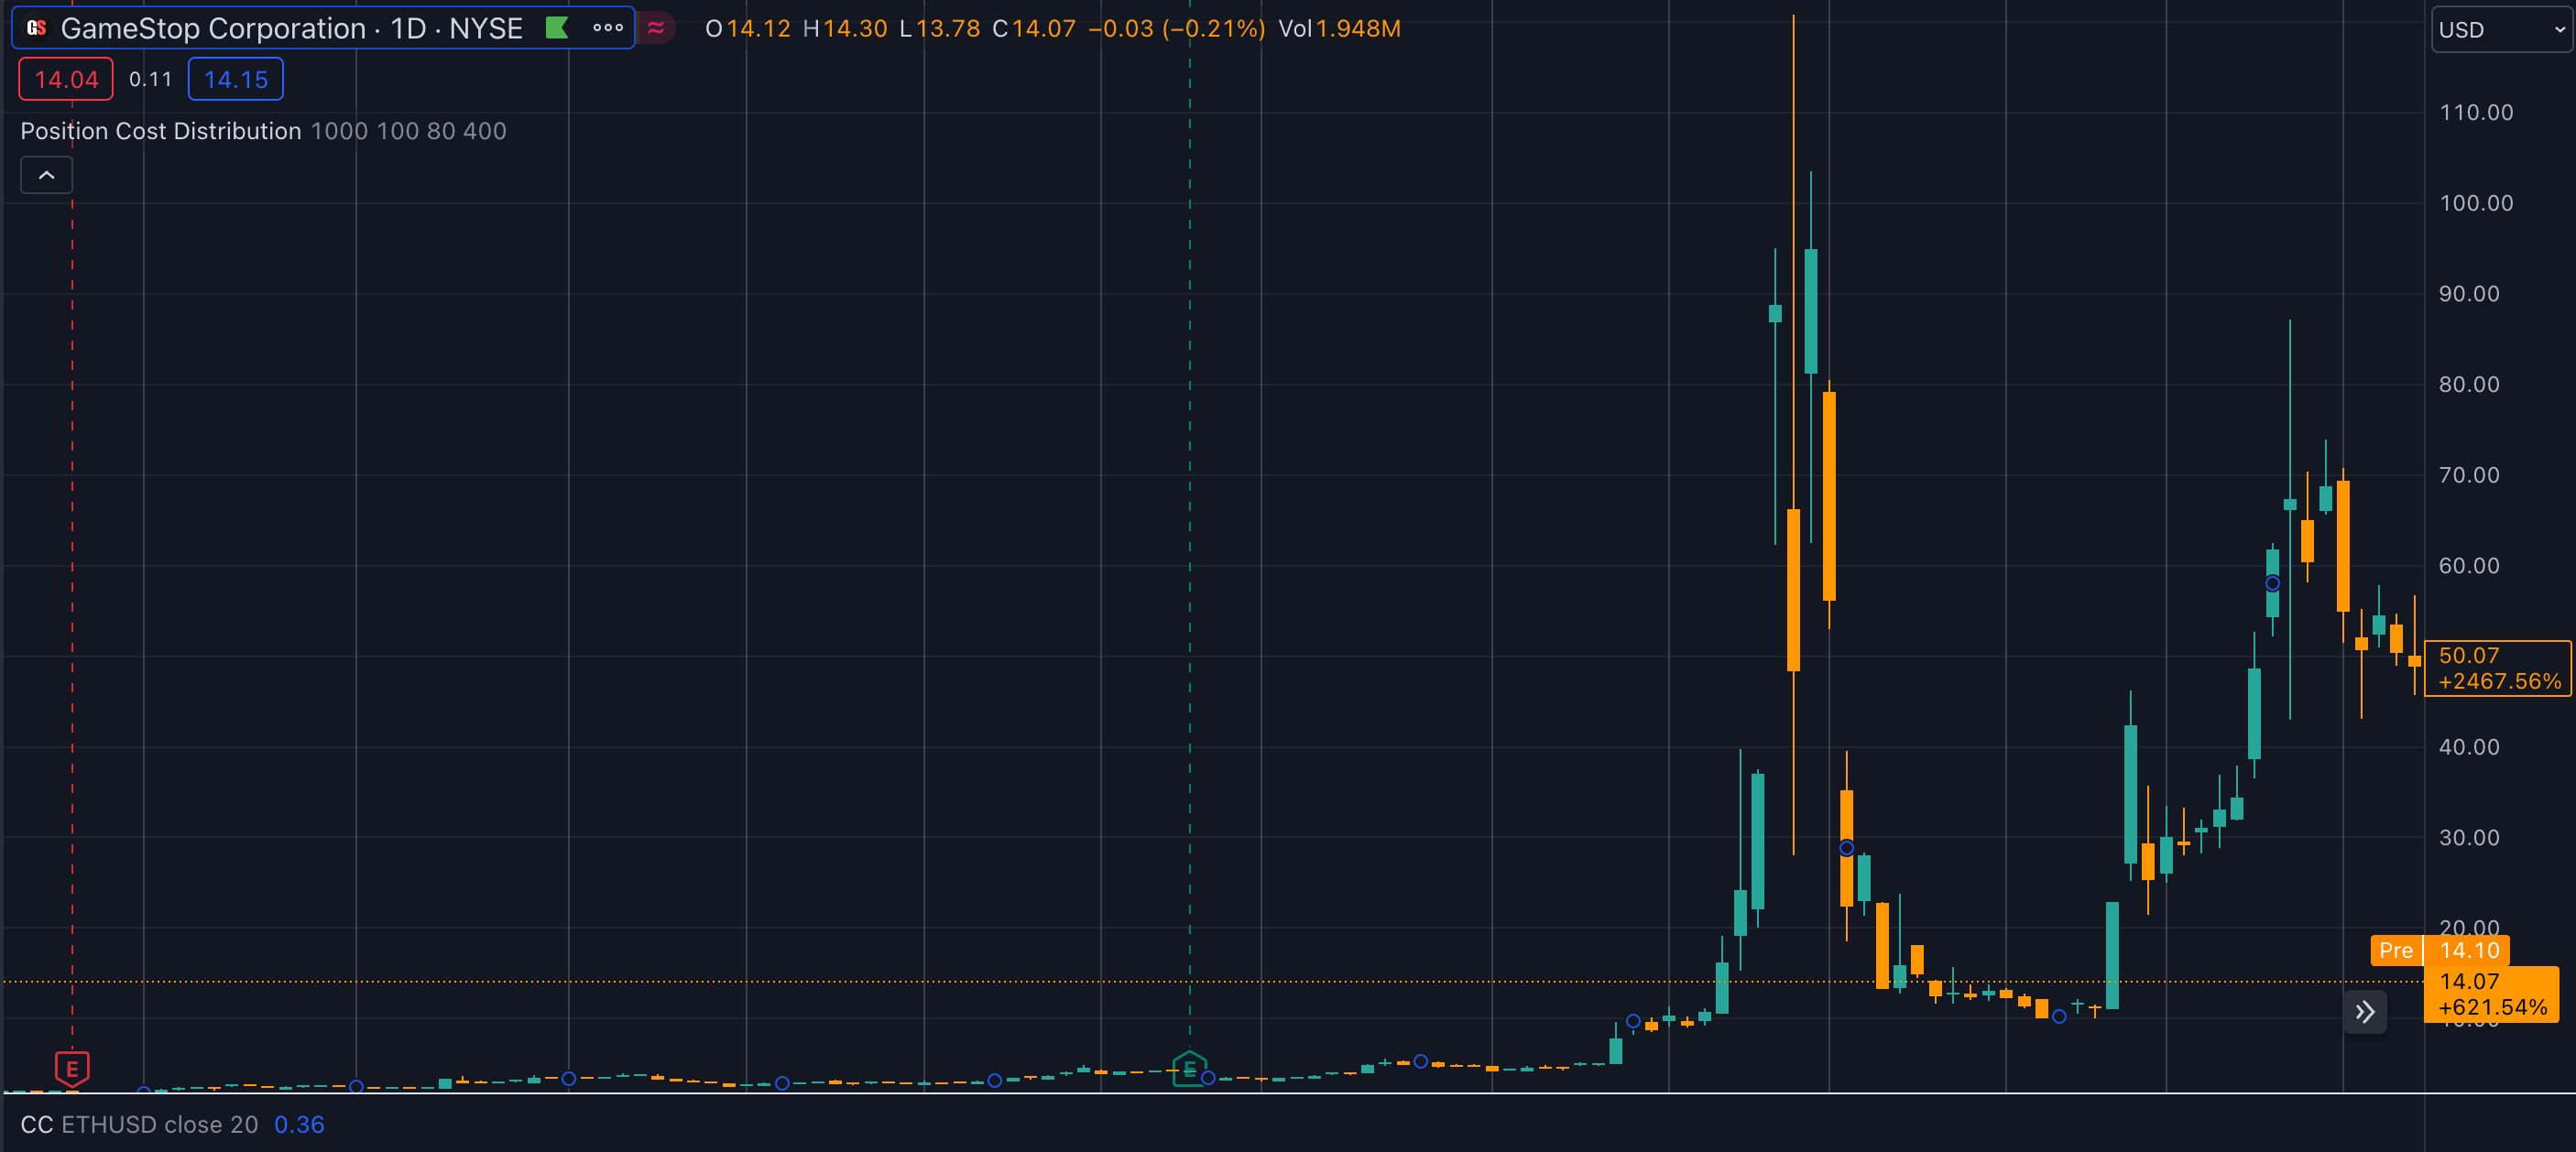 GME stock price after split (Source: TradingView)